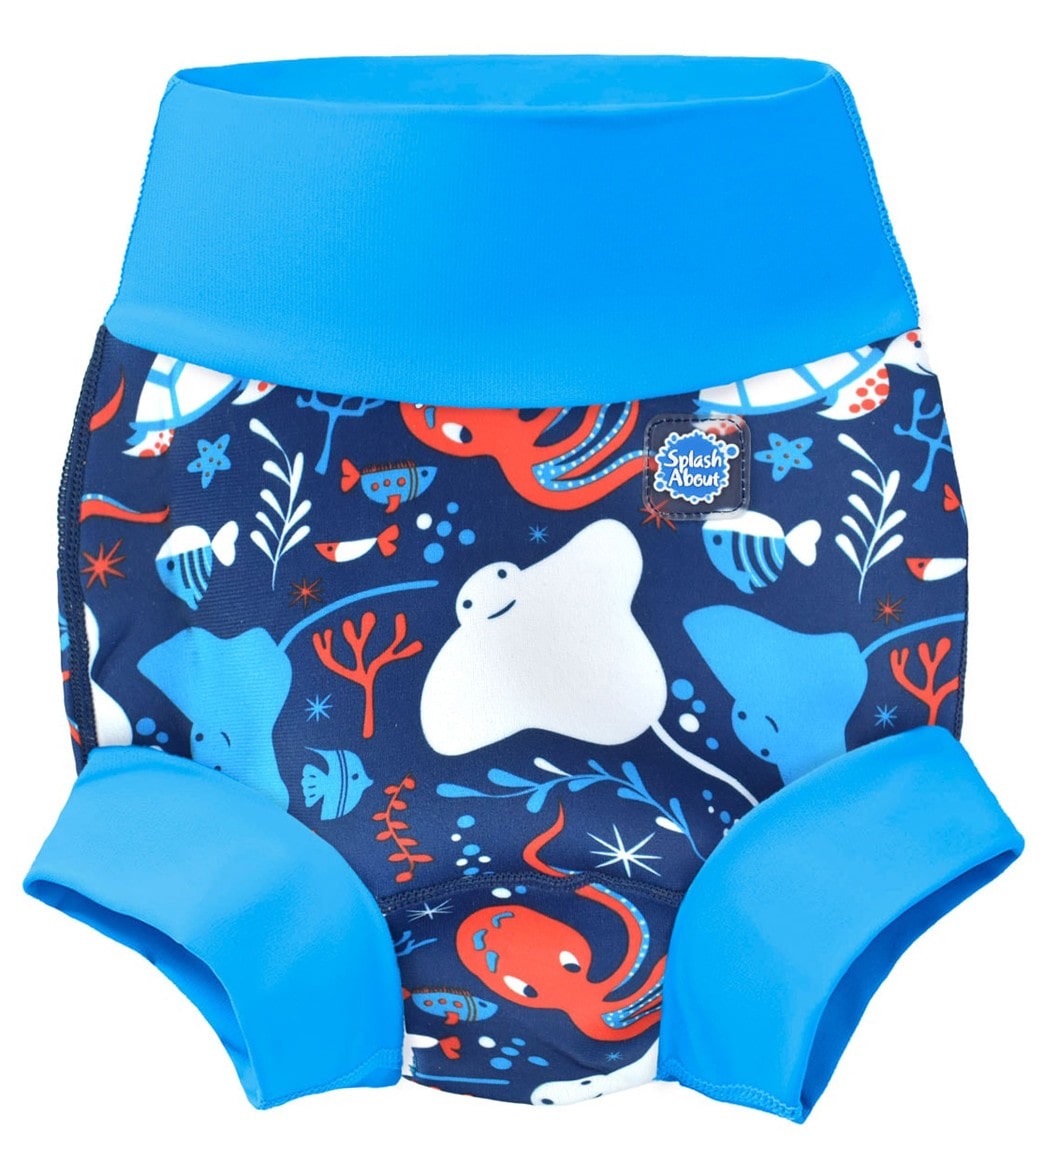 Splash About Under The Sea Happy Nappy Swim Diaper Baby - The Large 6-12 Months - Swimoutlet.com